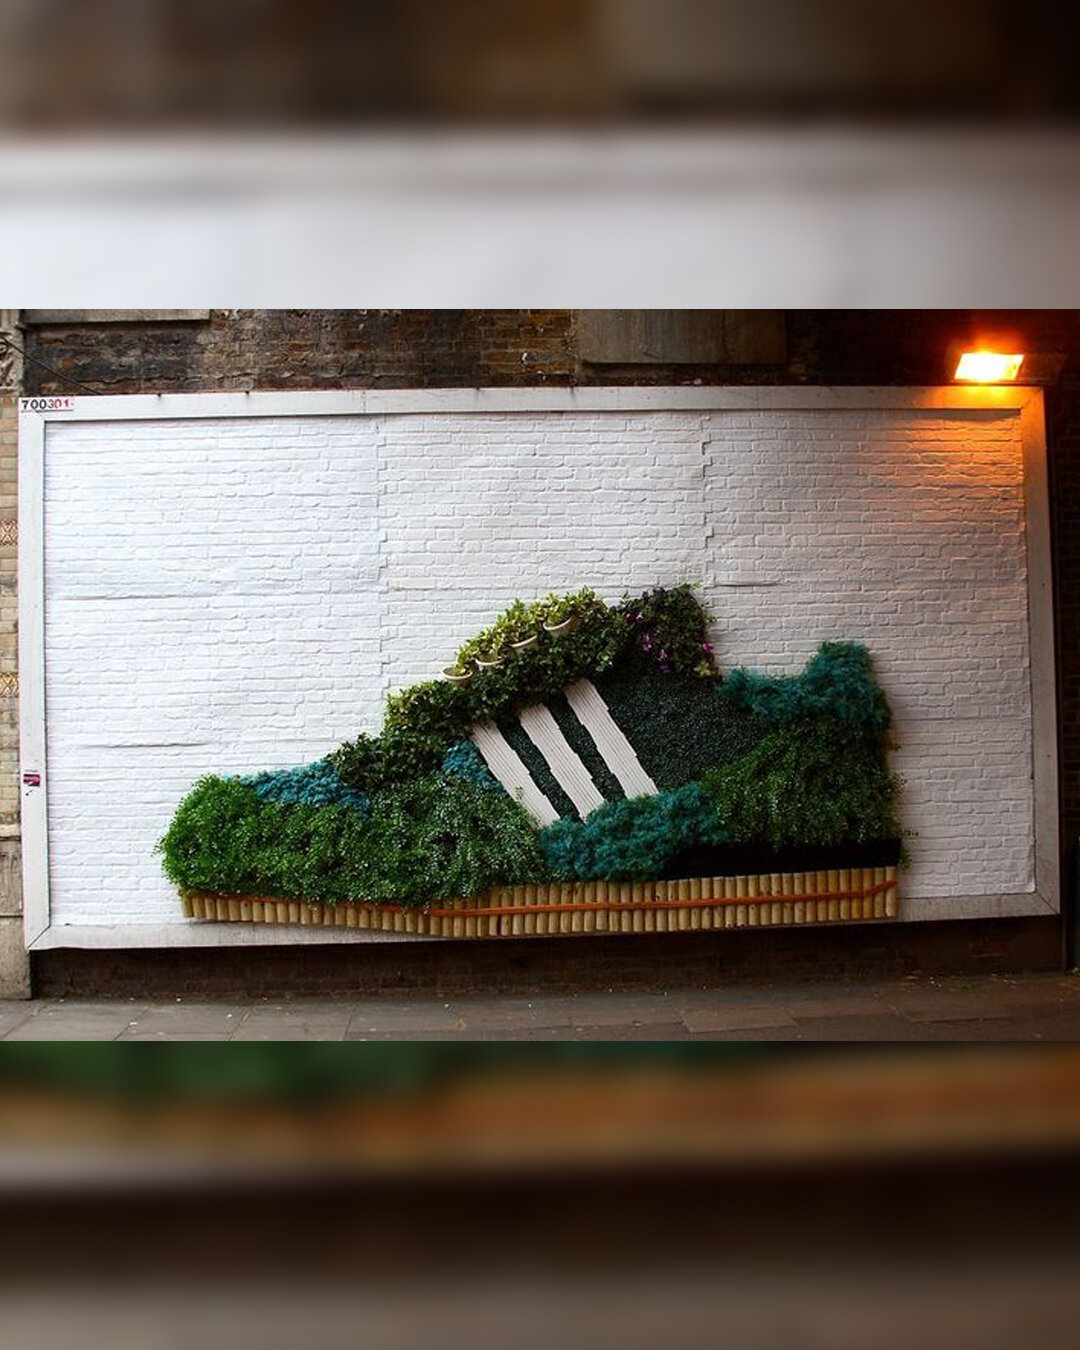 A few years back, @adidas launched their eco-friendly sneaker line called Gr&uuml;n, and they marked the occasion by creating an innovative billboard made entirely of sustainable materials and plants. #sustainablefashion

📸 by @dailyadcoffee